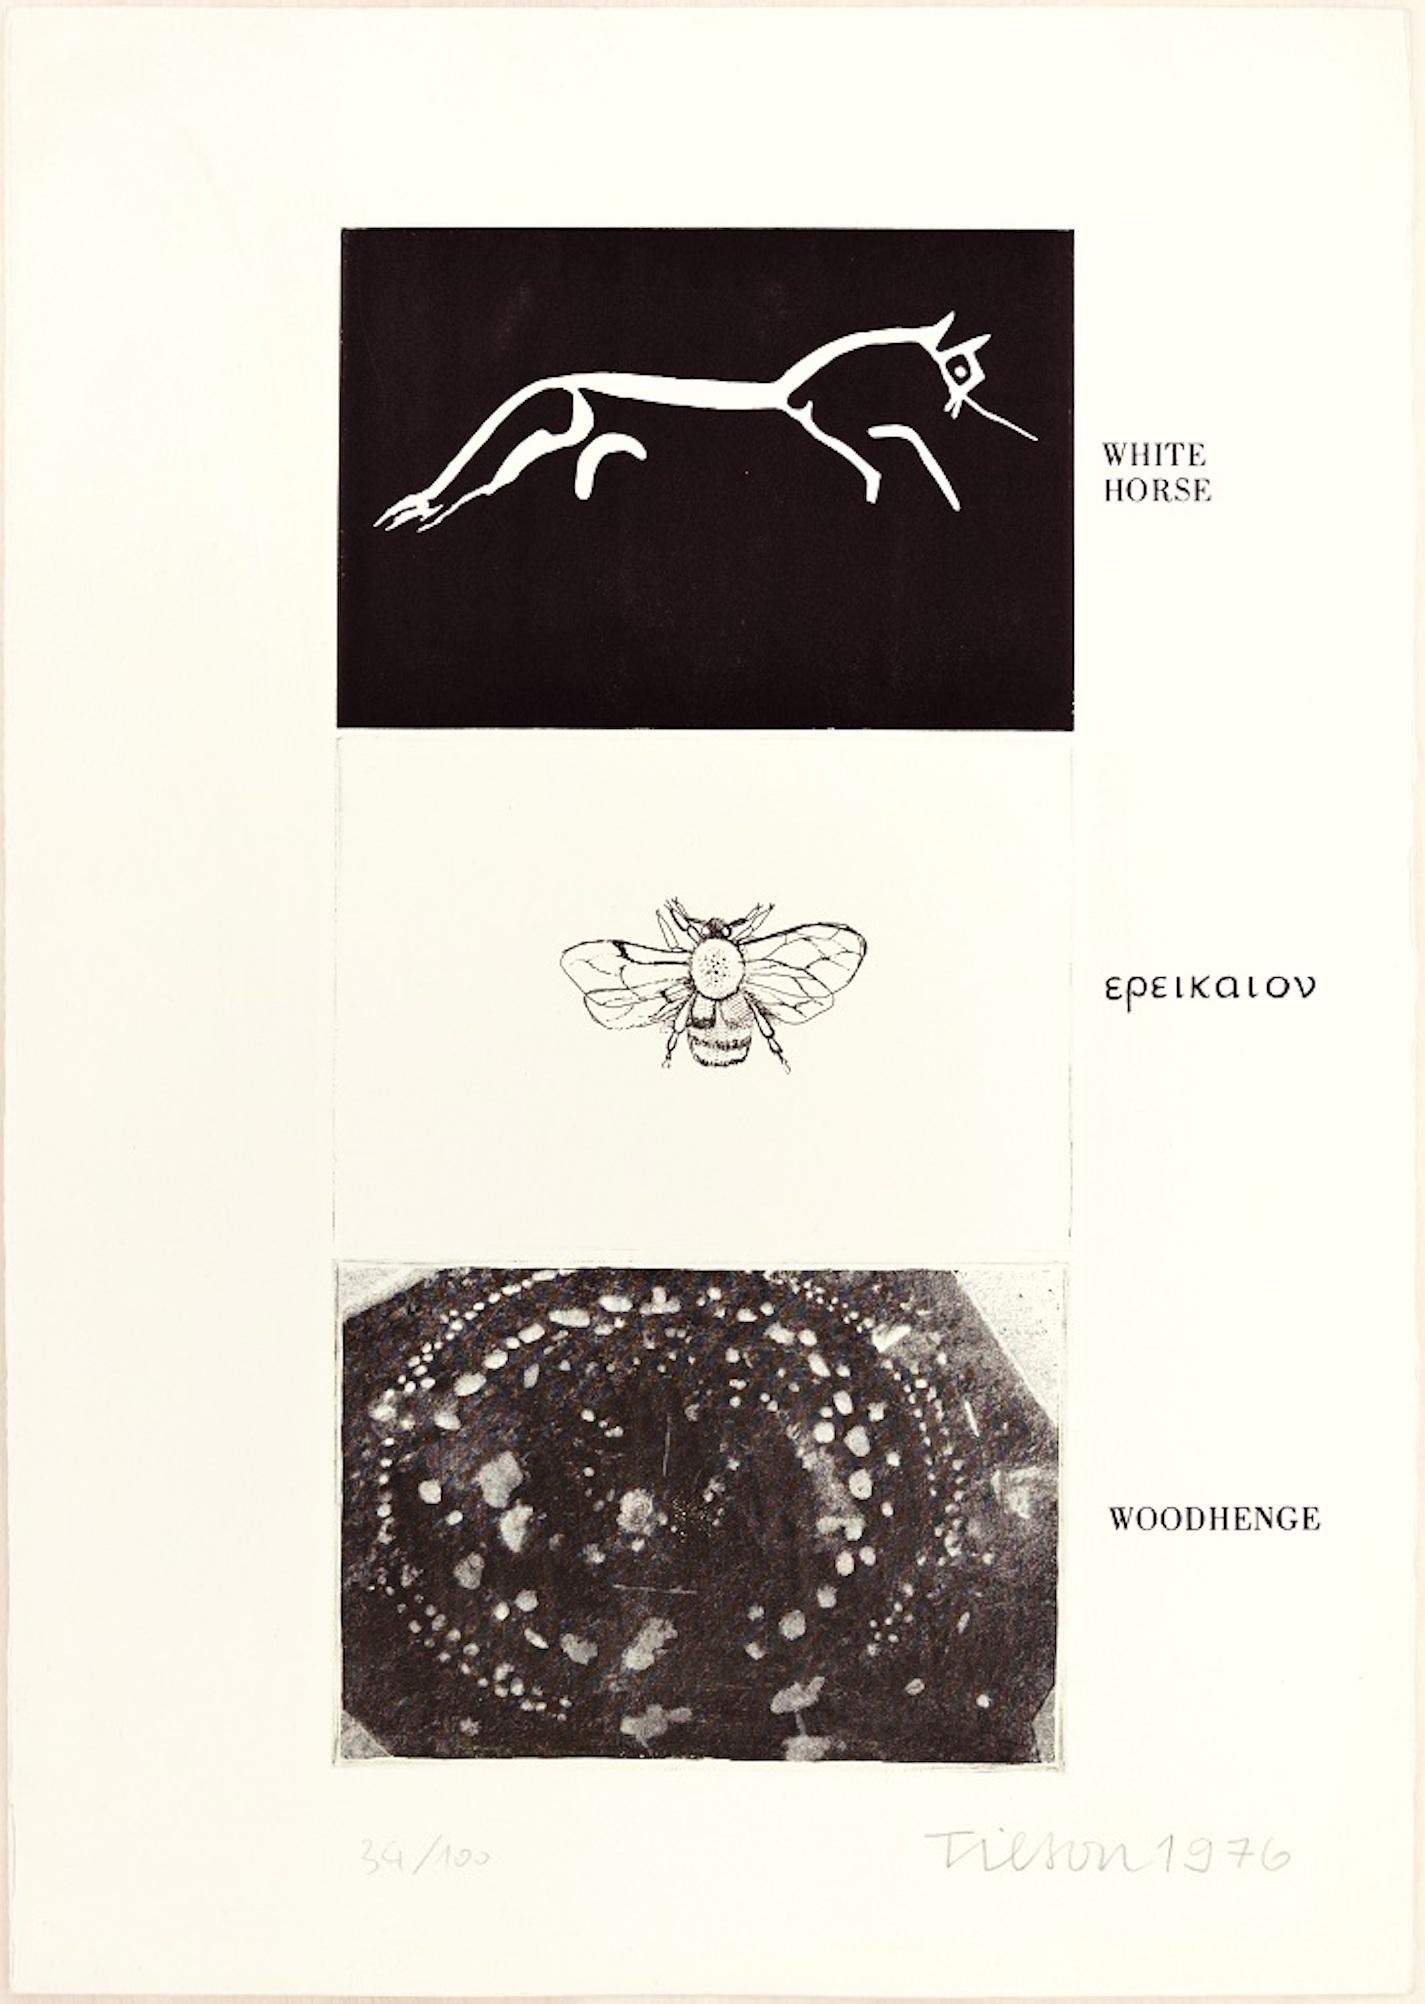 White Horse, Woodhenge is a black and white etching on rosaspina Fabriano watermarked paper, realized in 1976 by the English pop artist, Joe Tilson.

Hand-signed, dated and numbered in pencil on lower margin. Edition of 100 prints. In excellent